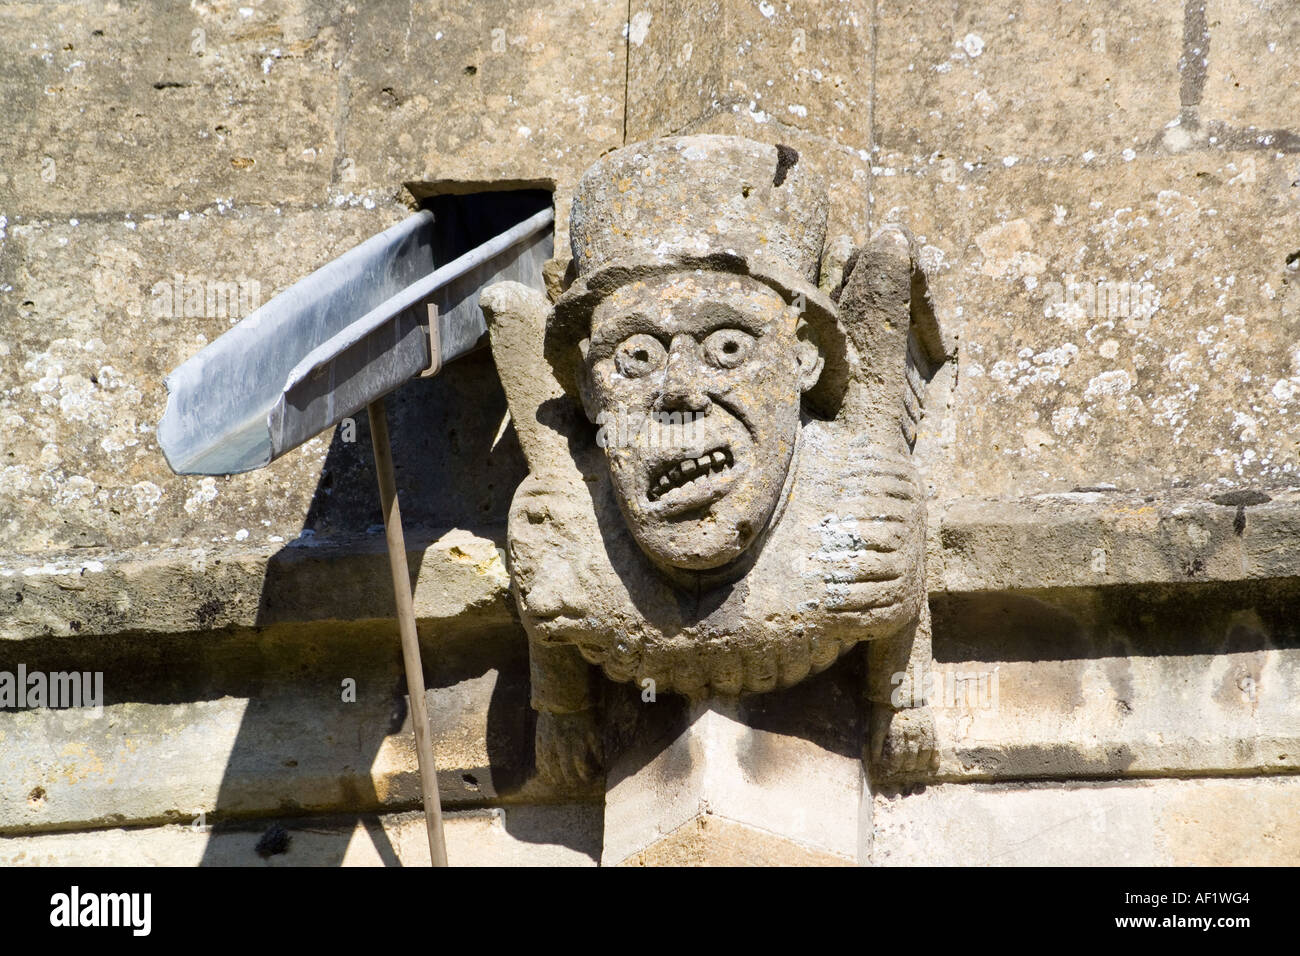 Medieval gargoyle on St Peters church (1465) in the Cotswold town of Winchcombe, Gloucestershire Stock Photo